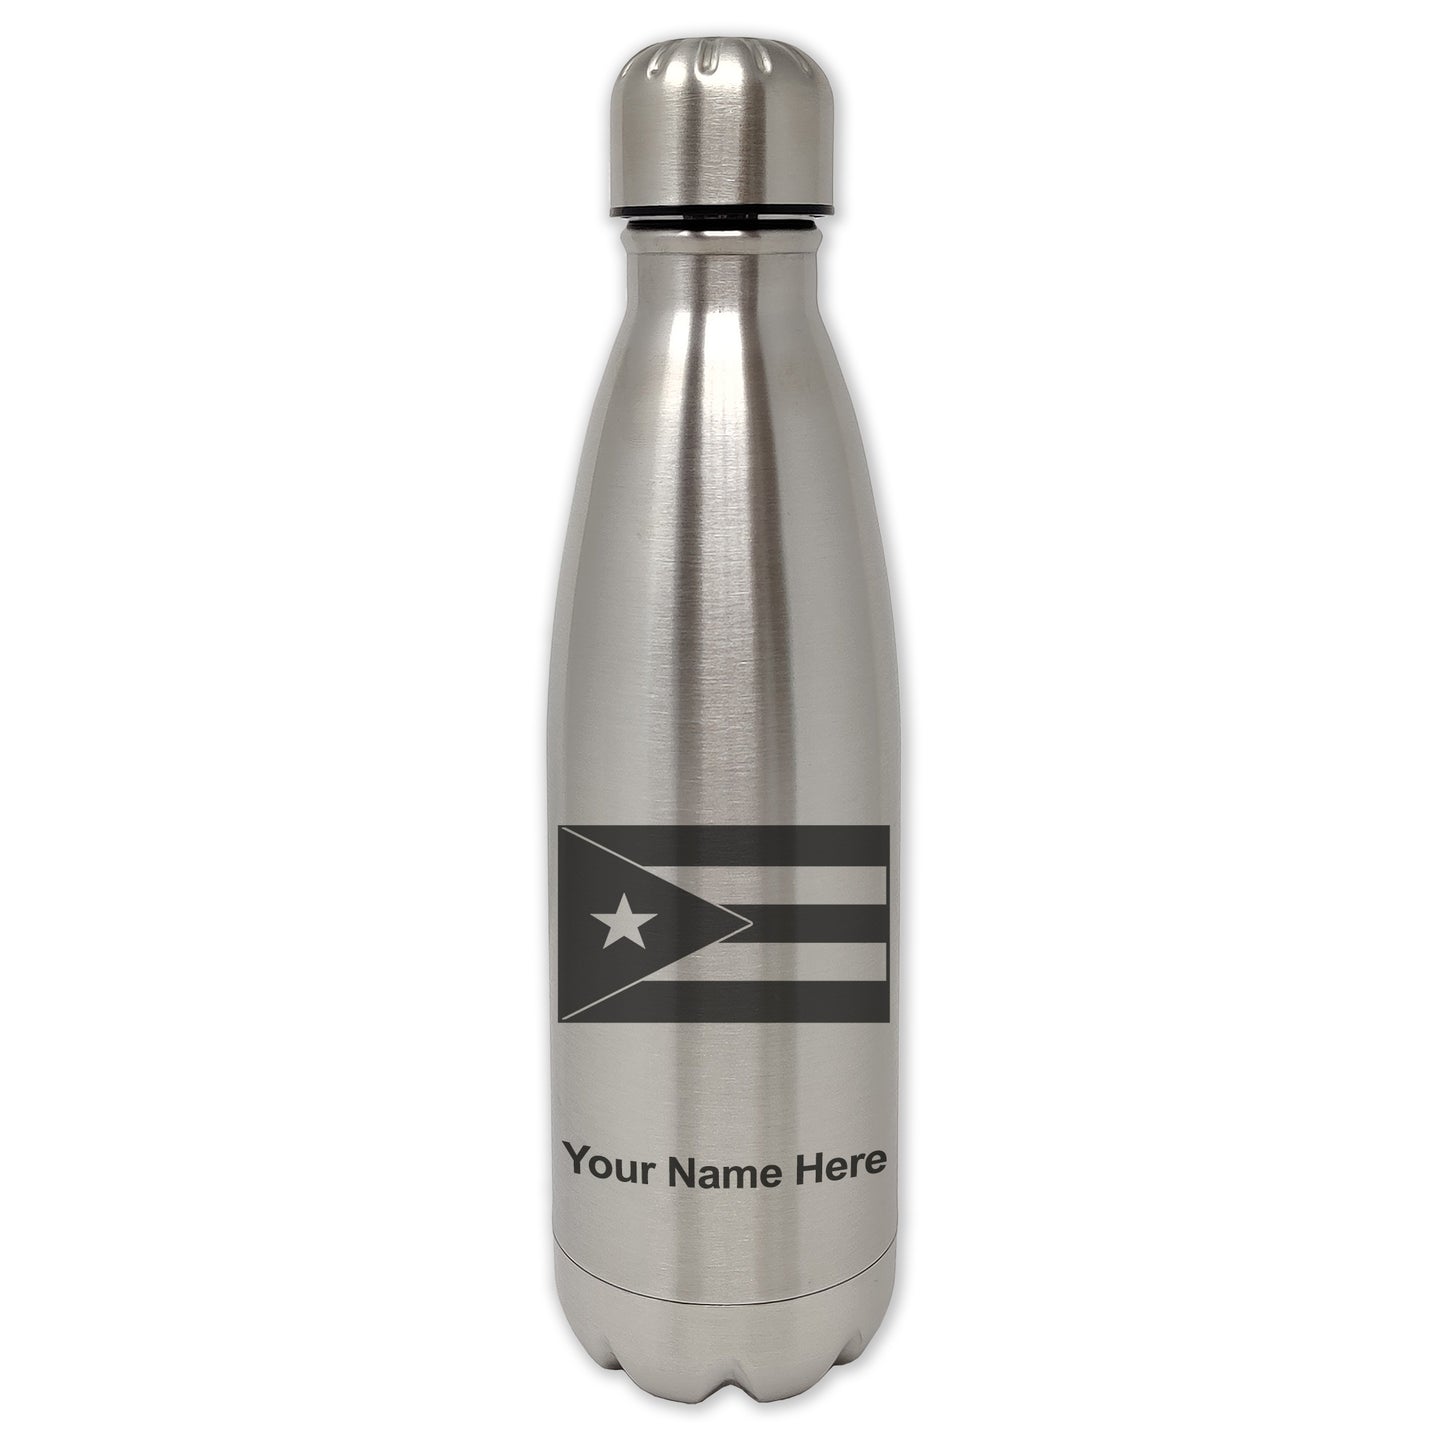 LaserGram Single Wall Water Bottle, Flag of Puerto Rico, Personalized Engraving Included